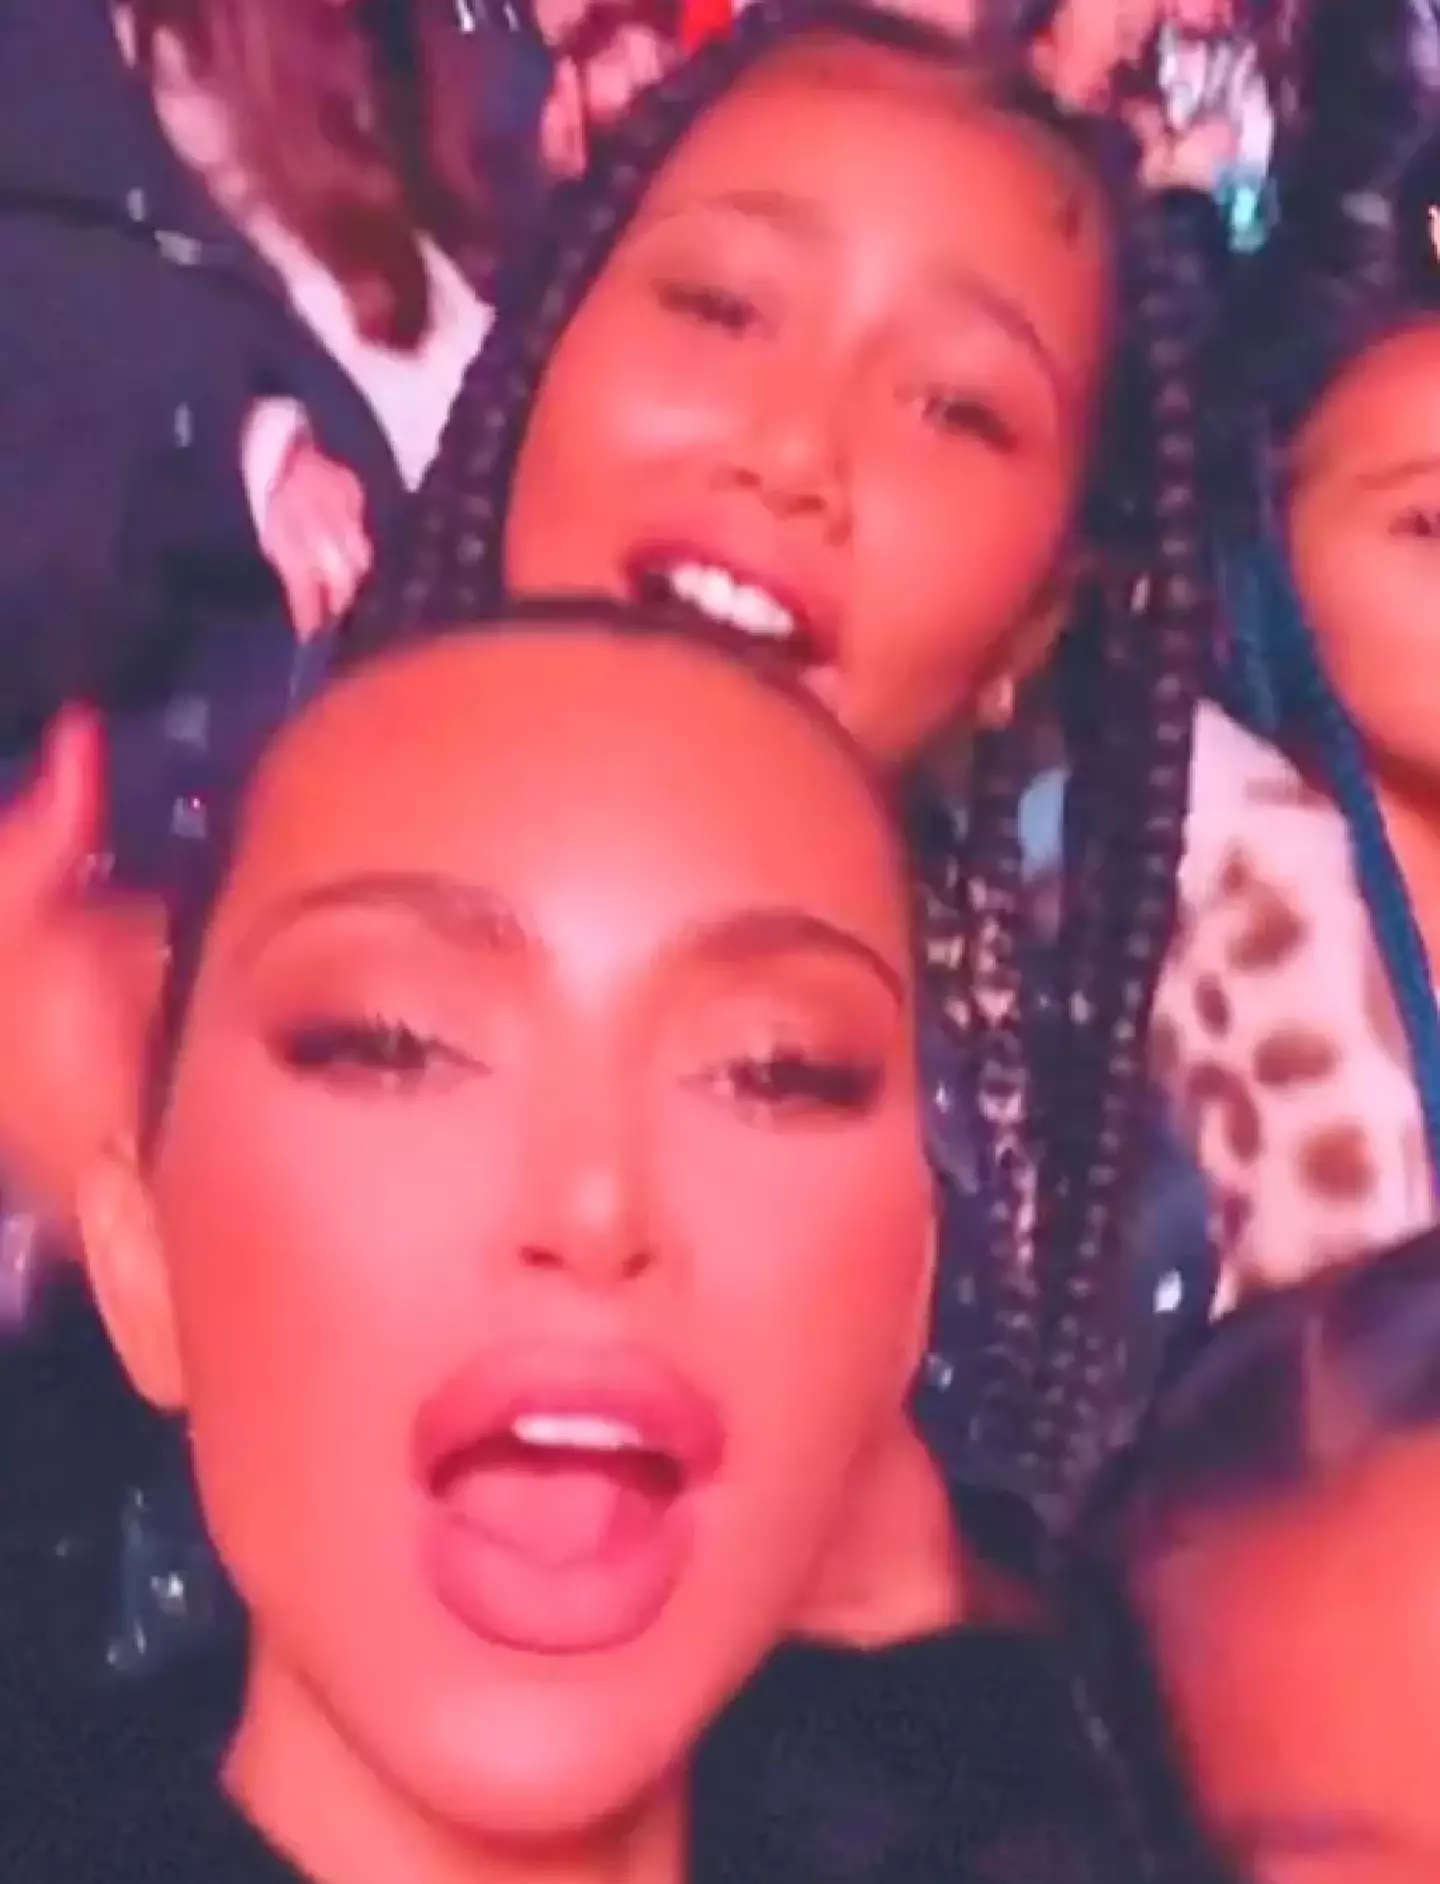 North West stole the show.